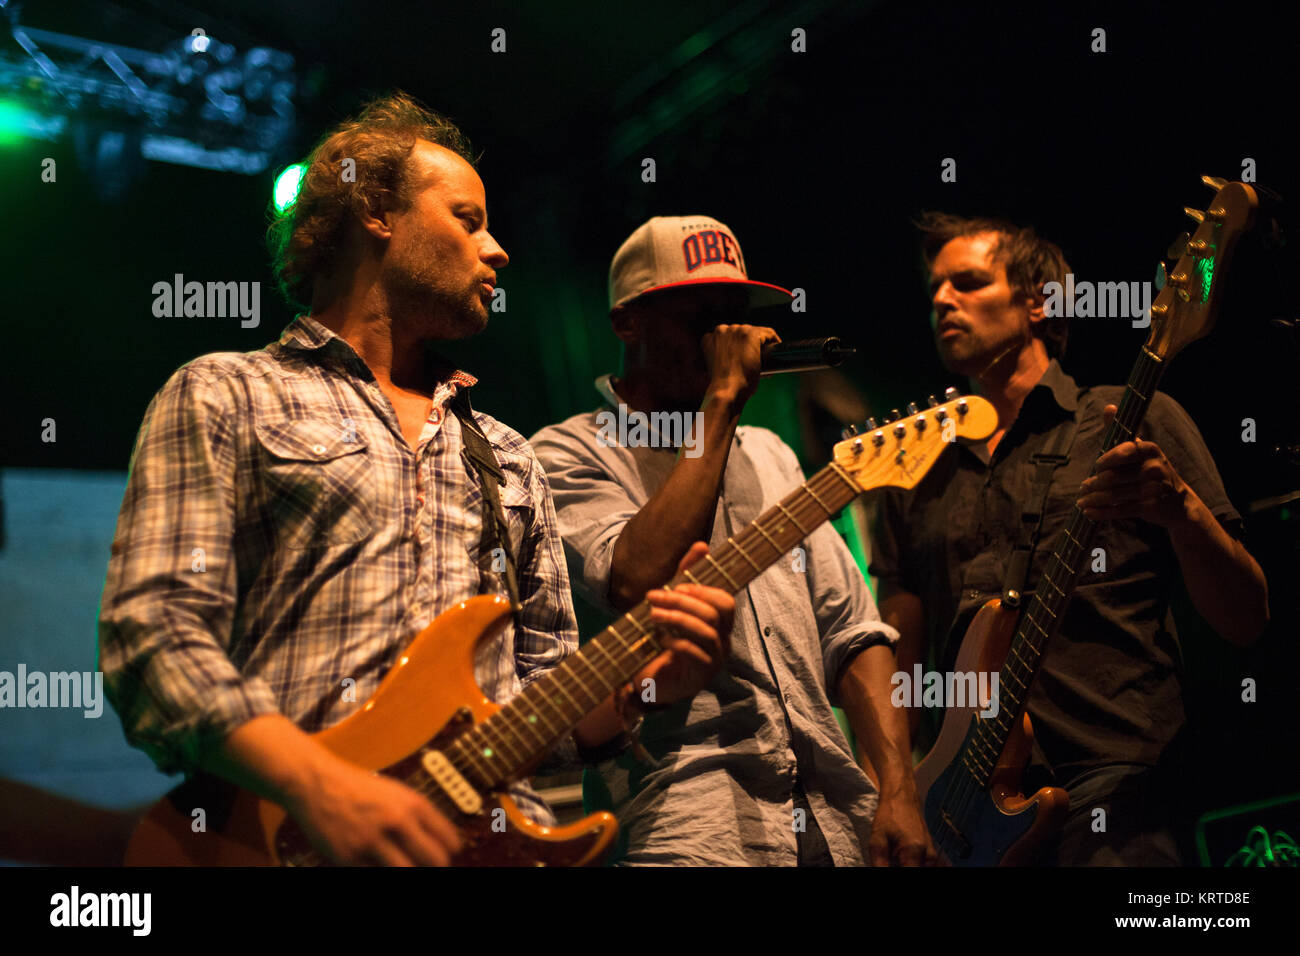 The Austrian rock and electronic music band Sofa Surfers performs a live  concert at the Austrian music festival On The Rocks 2014 at the  “Steinbruch” in Golling. Austria, 18.07.2014 Stock Photo - Alamy